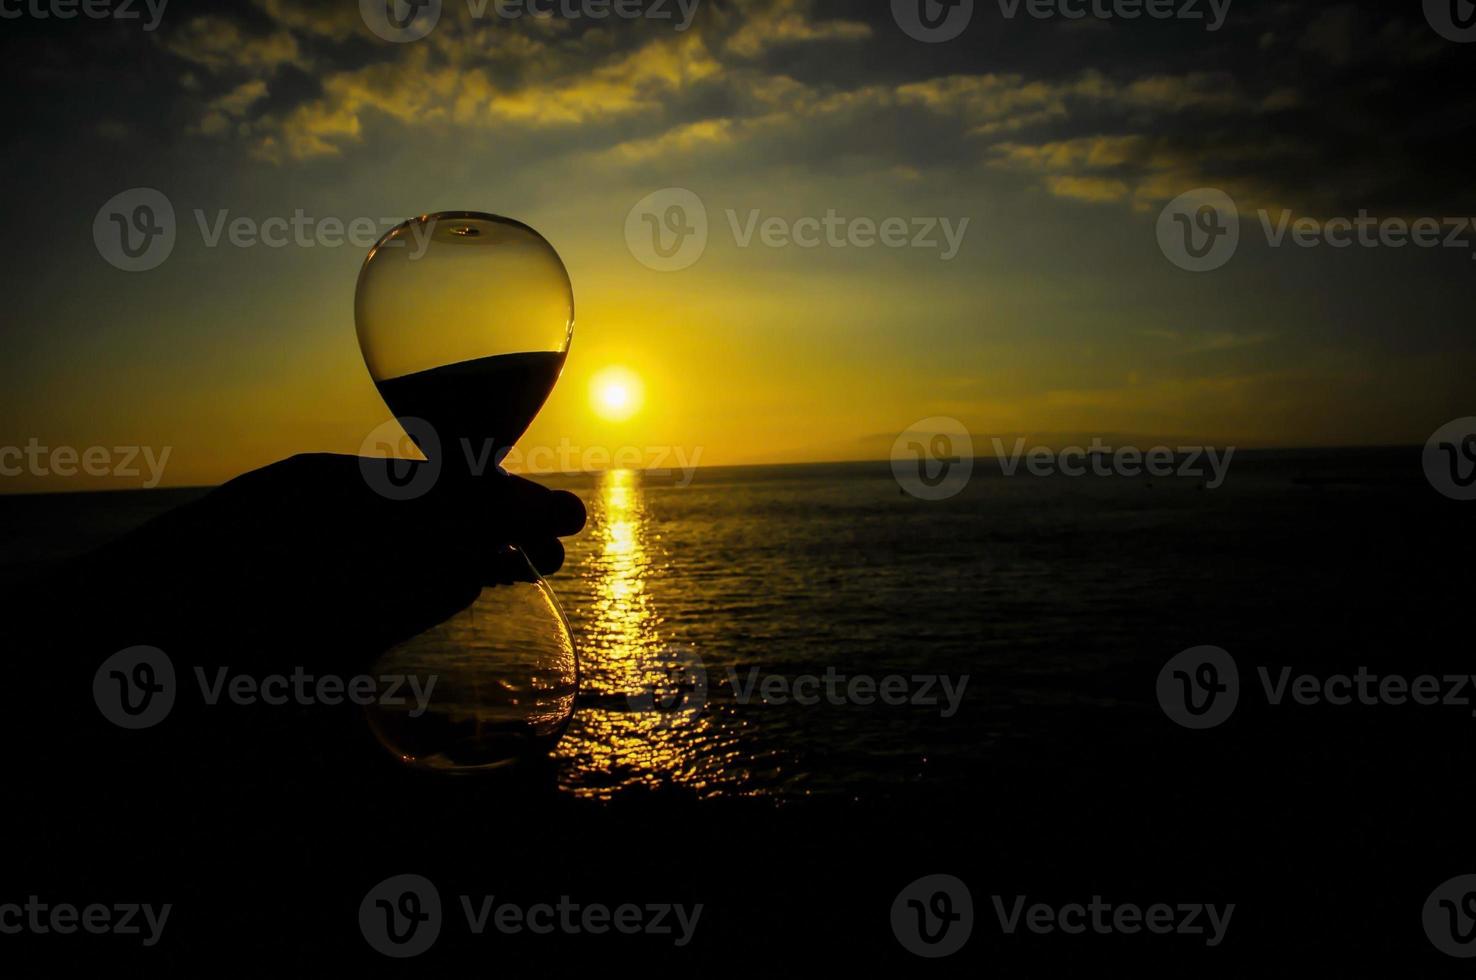 A beautiful sunset view and an hourglass photo